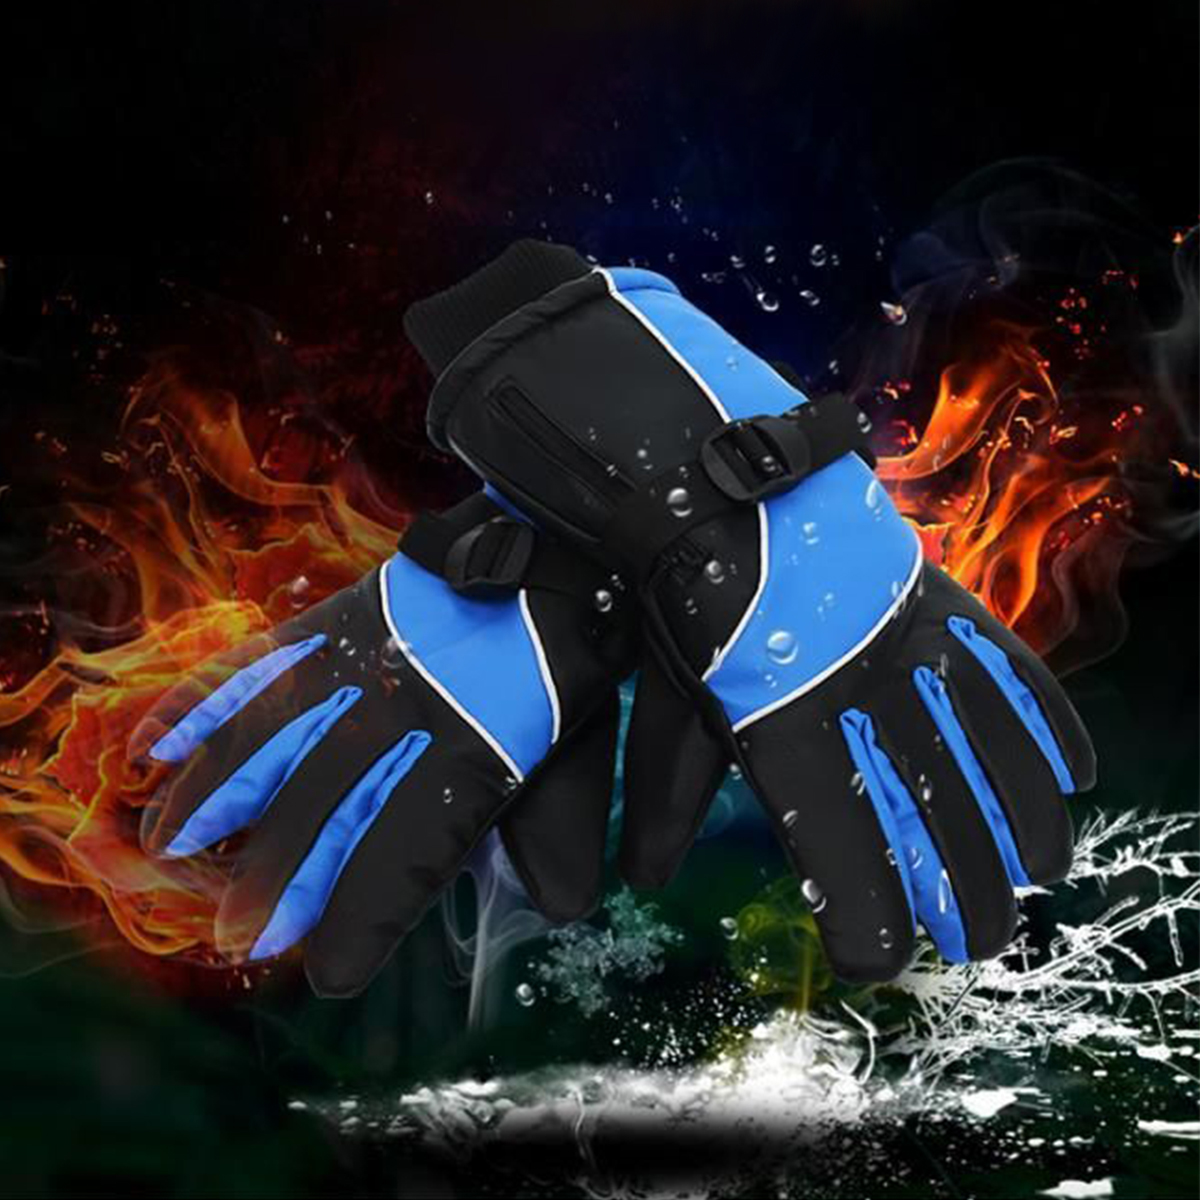 

2600mAh 7.4V Electric Rechargeable Battery Heated Motorcycle Gloves Waterproof Winter Warm Hand